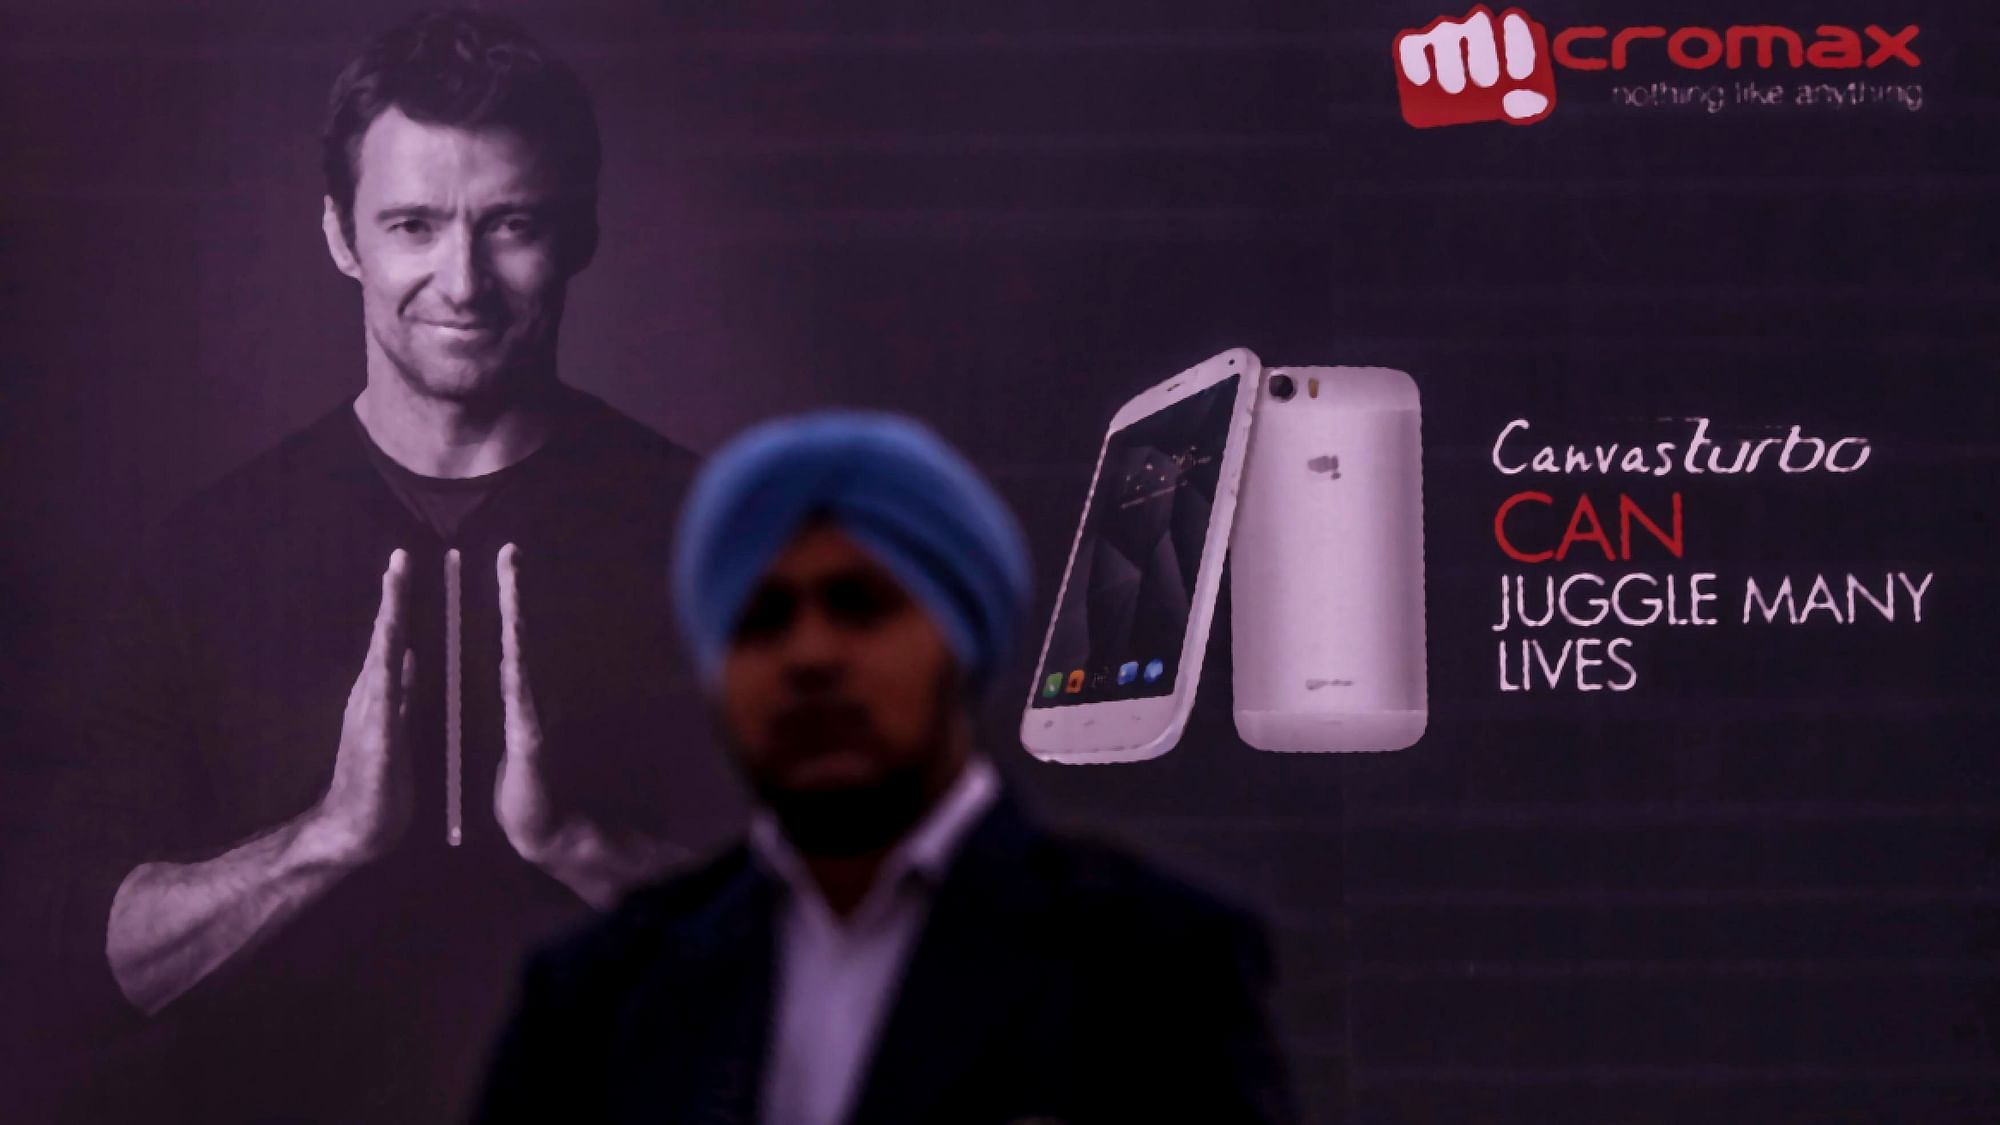 Micromax was once the leader of the Indian mobile market that’s now been overtaken by the Chinese.